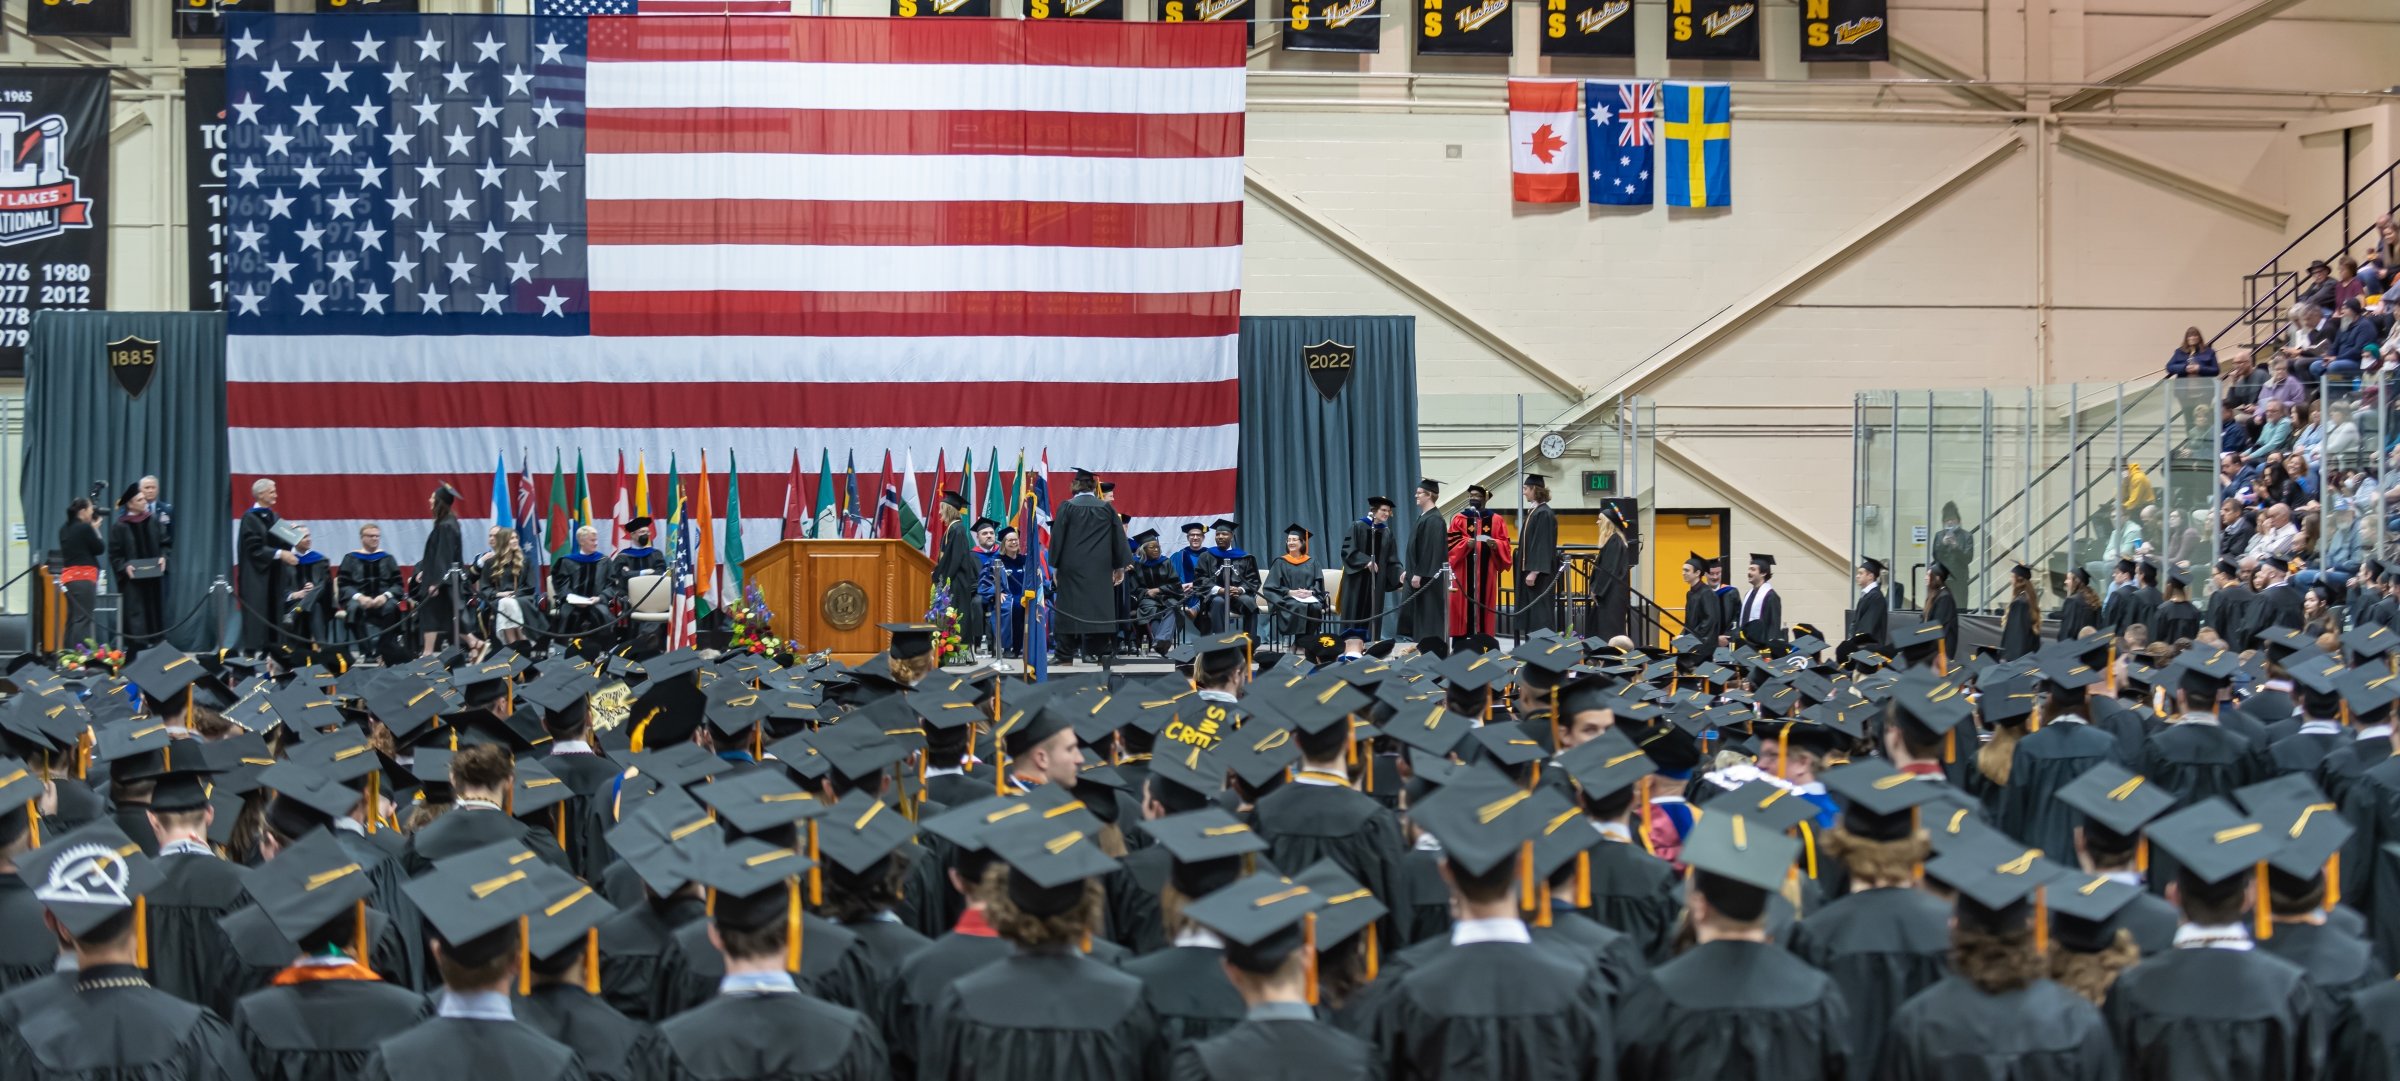 Spring Commencement 